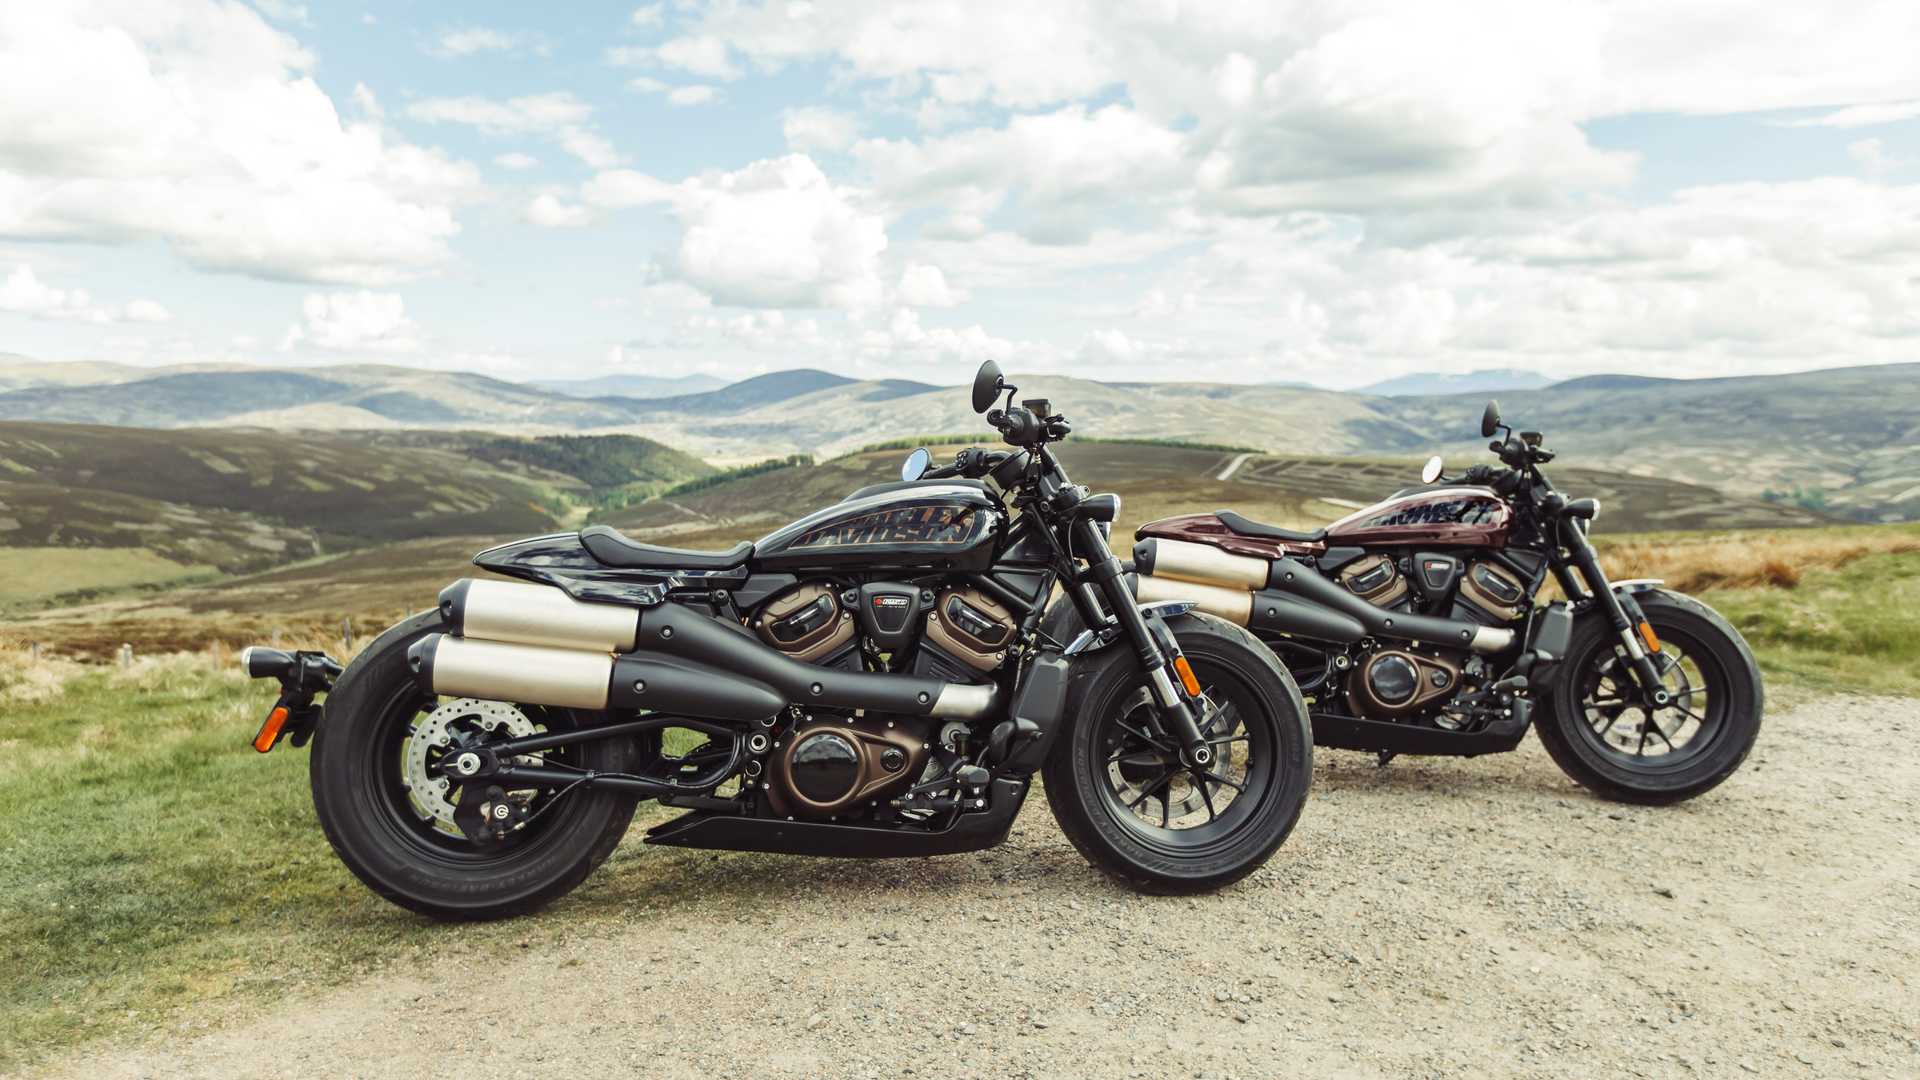 Harley Davidson India All Set To Launch New Sportster S